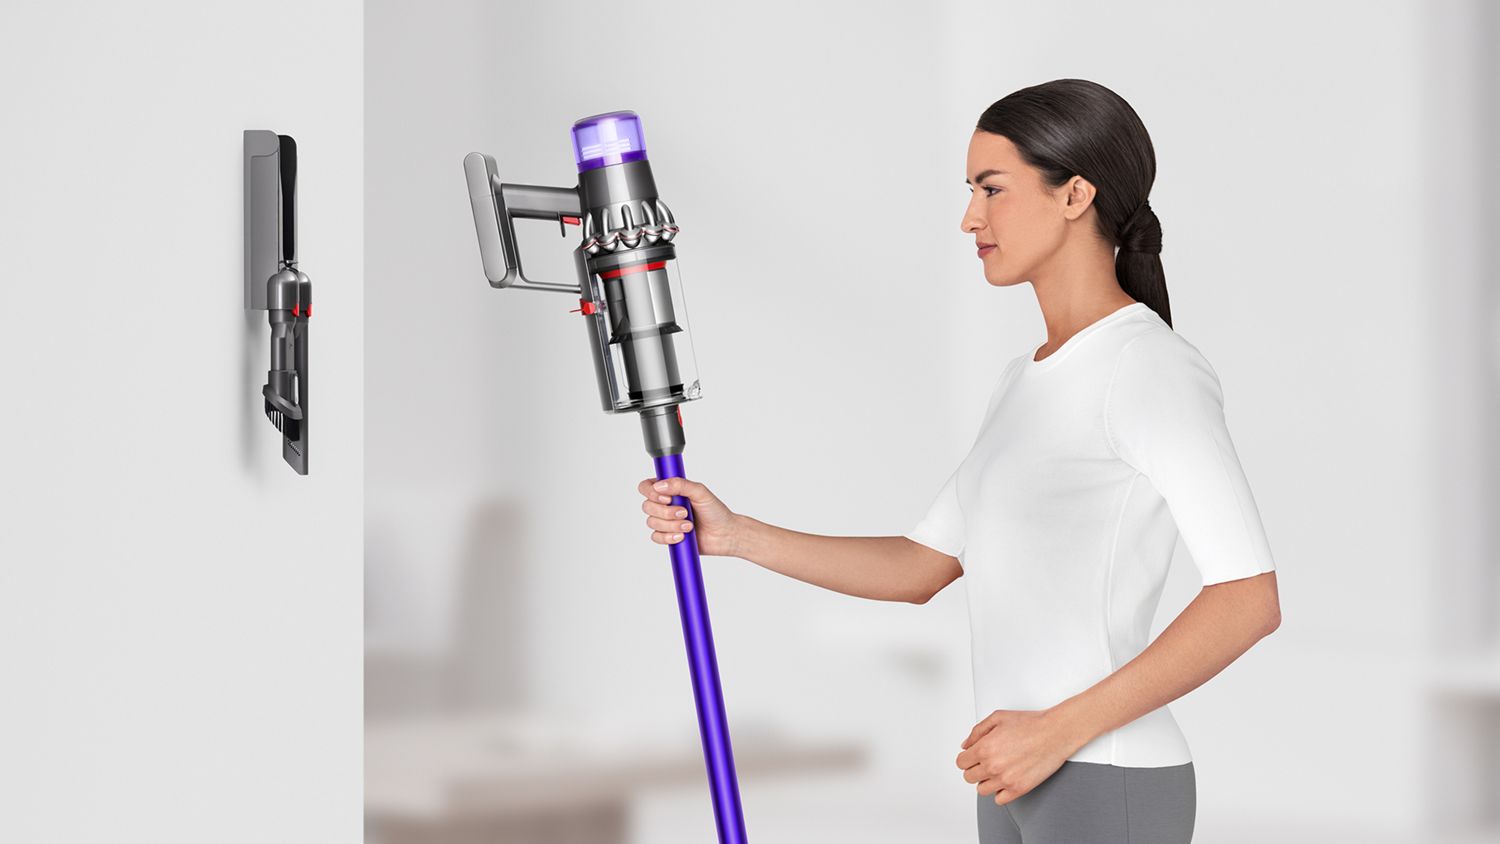 Dyson V11 Cordless Vacuum Cleaner Overview